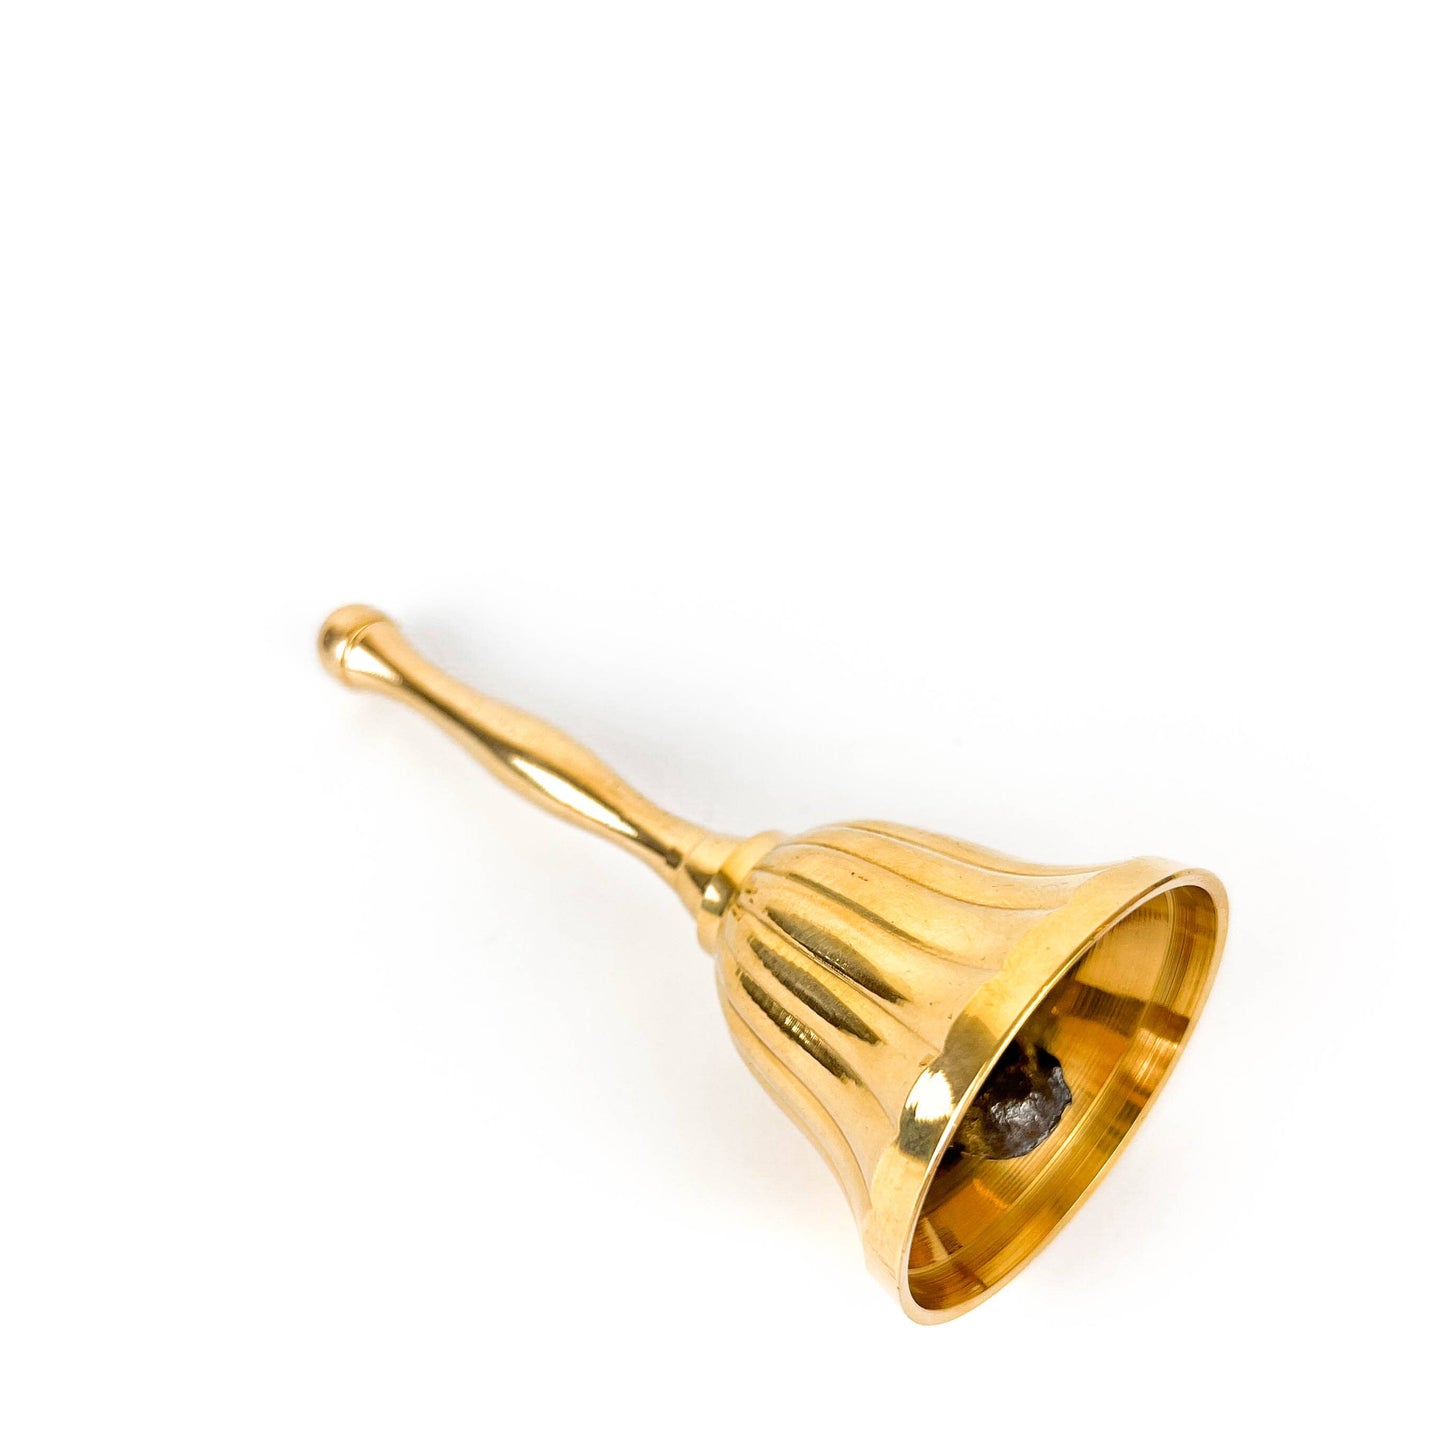 Brass bell with decorative scalloped outer bell and slender